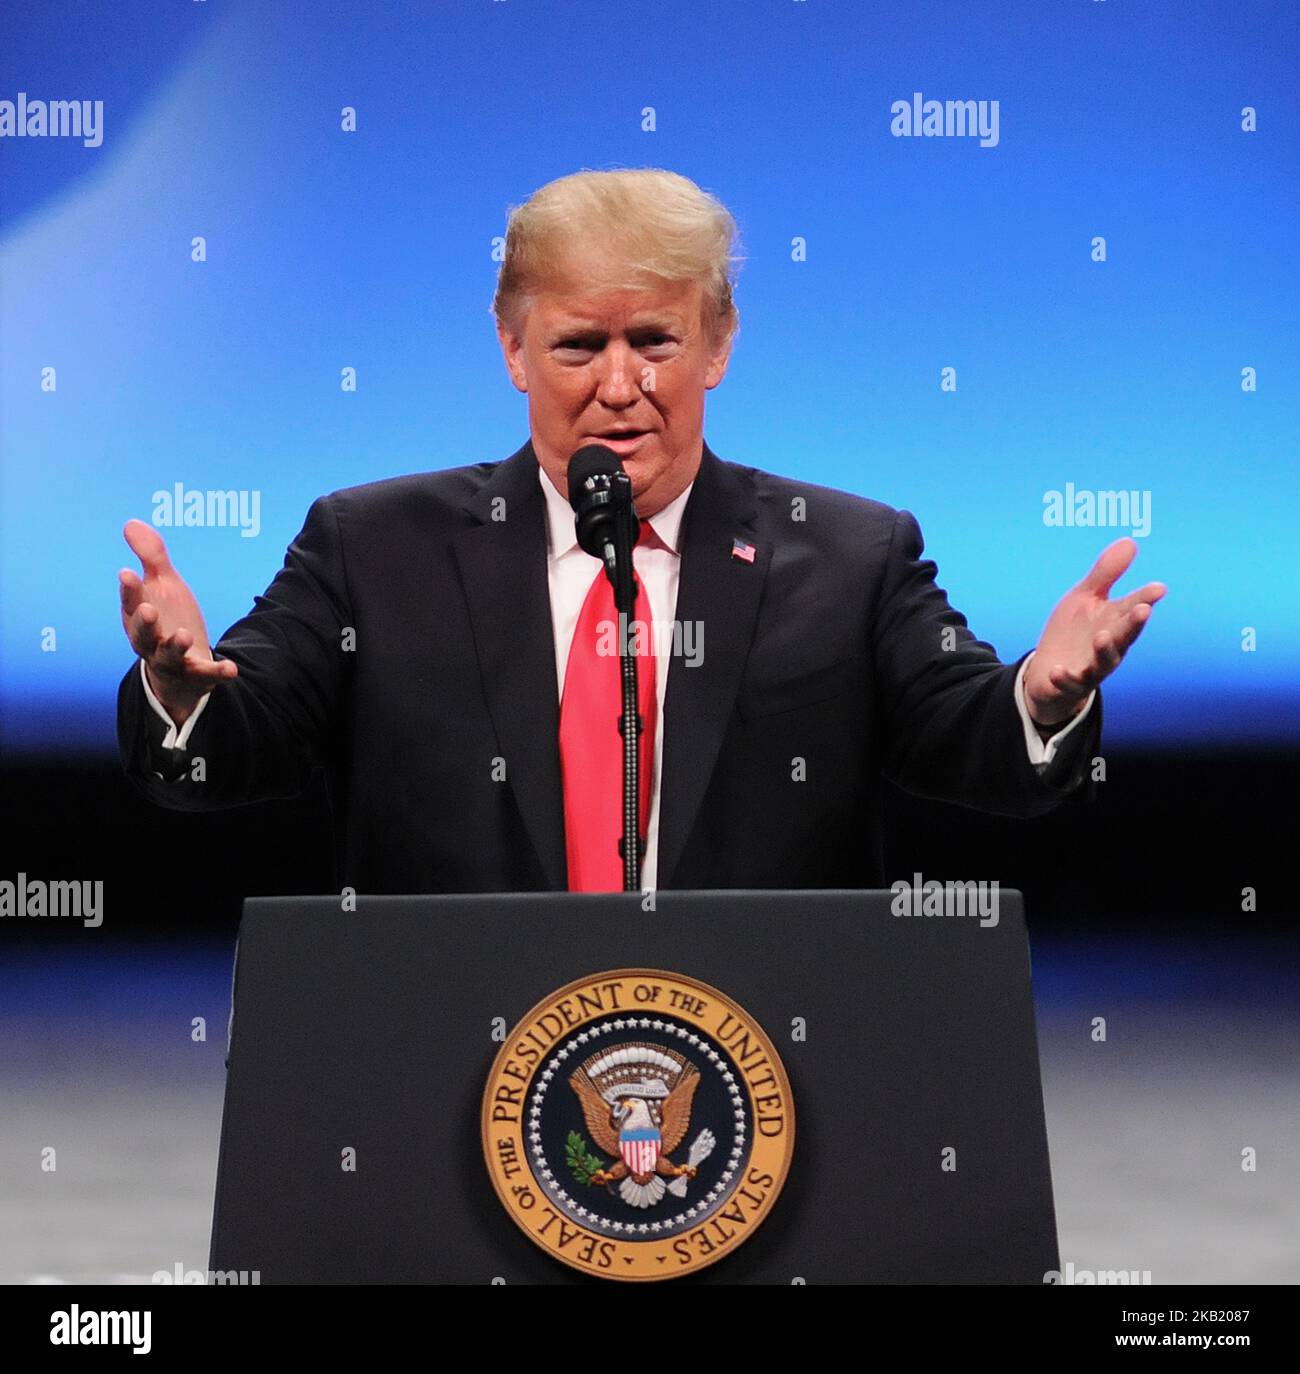 October 8, 2018 - Orlando, Florida, United States - U.S. President Donald Trump addresses attendees at the International Association of Chiefs of Police Annual Convention on October 8, 2018 at the Orange County Convention Center in Orlando, Florida. (Photo by Paul Hennessy/NurPhoto) Stock Photo